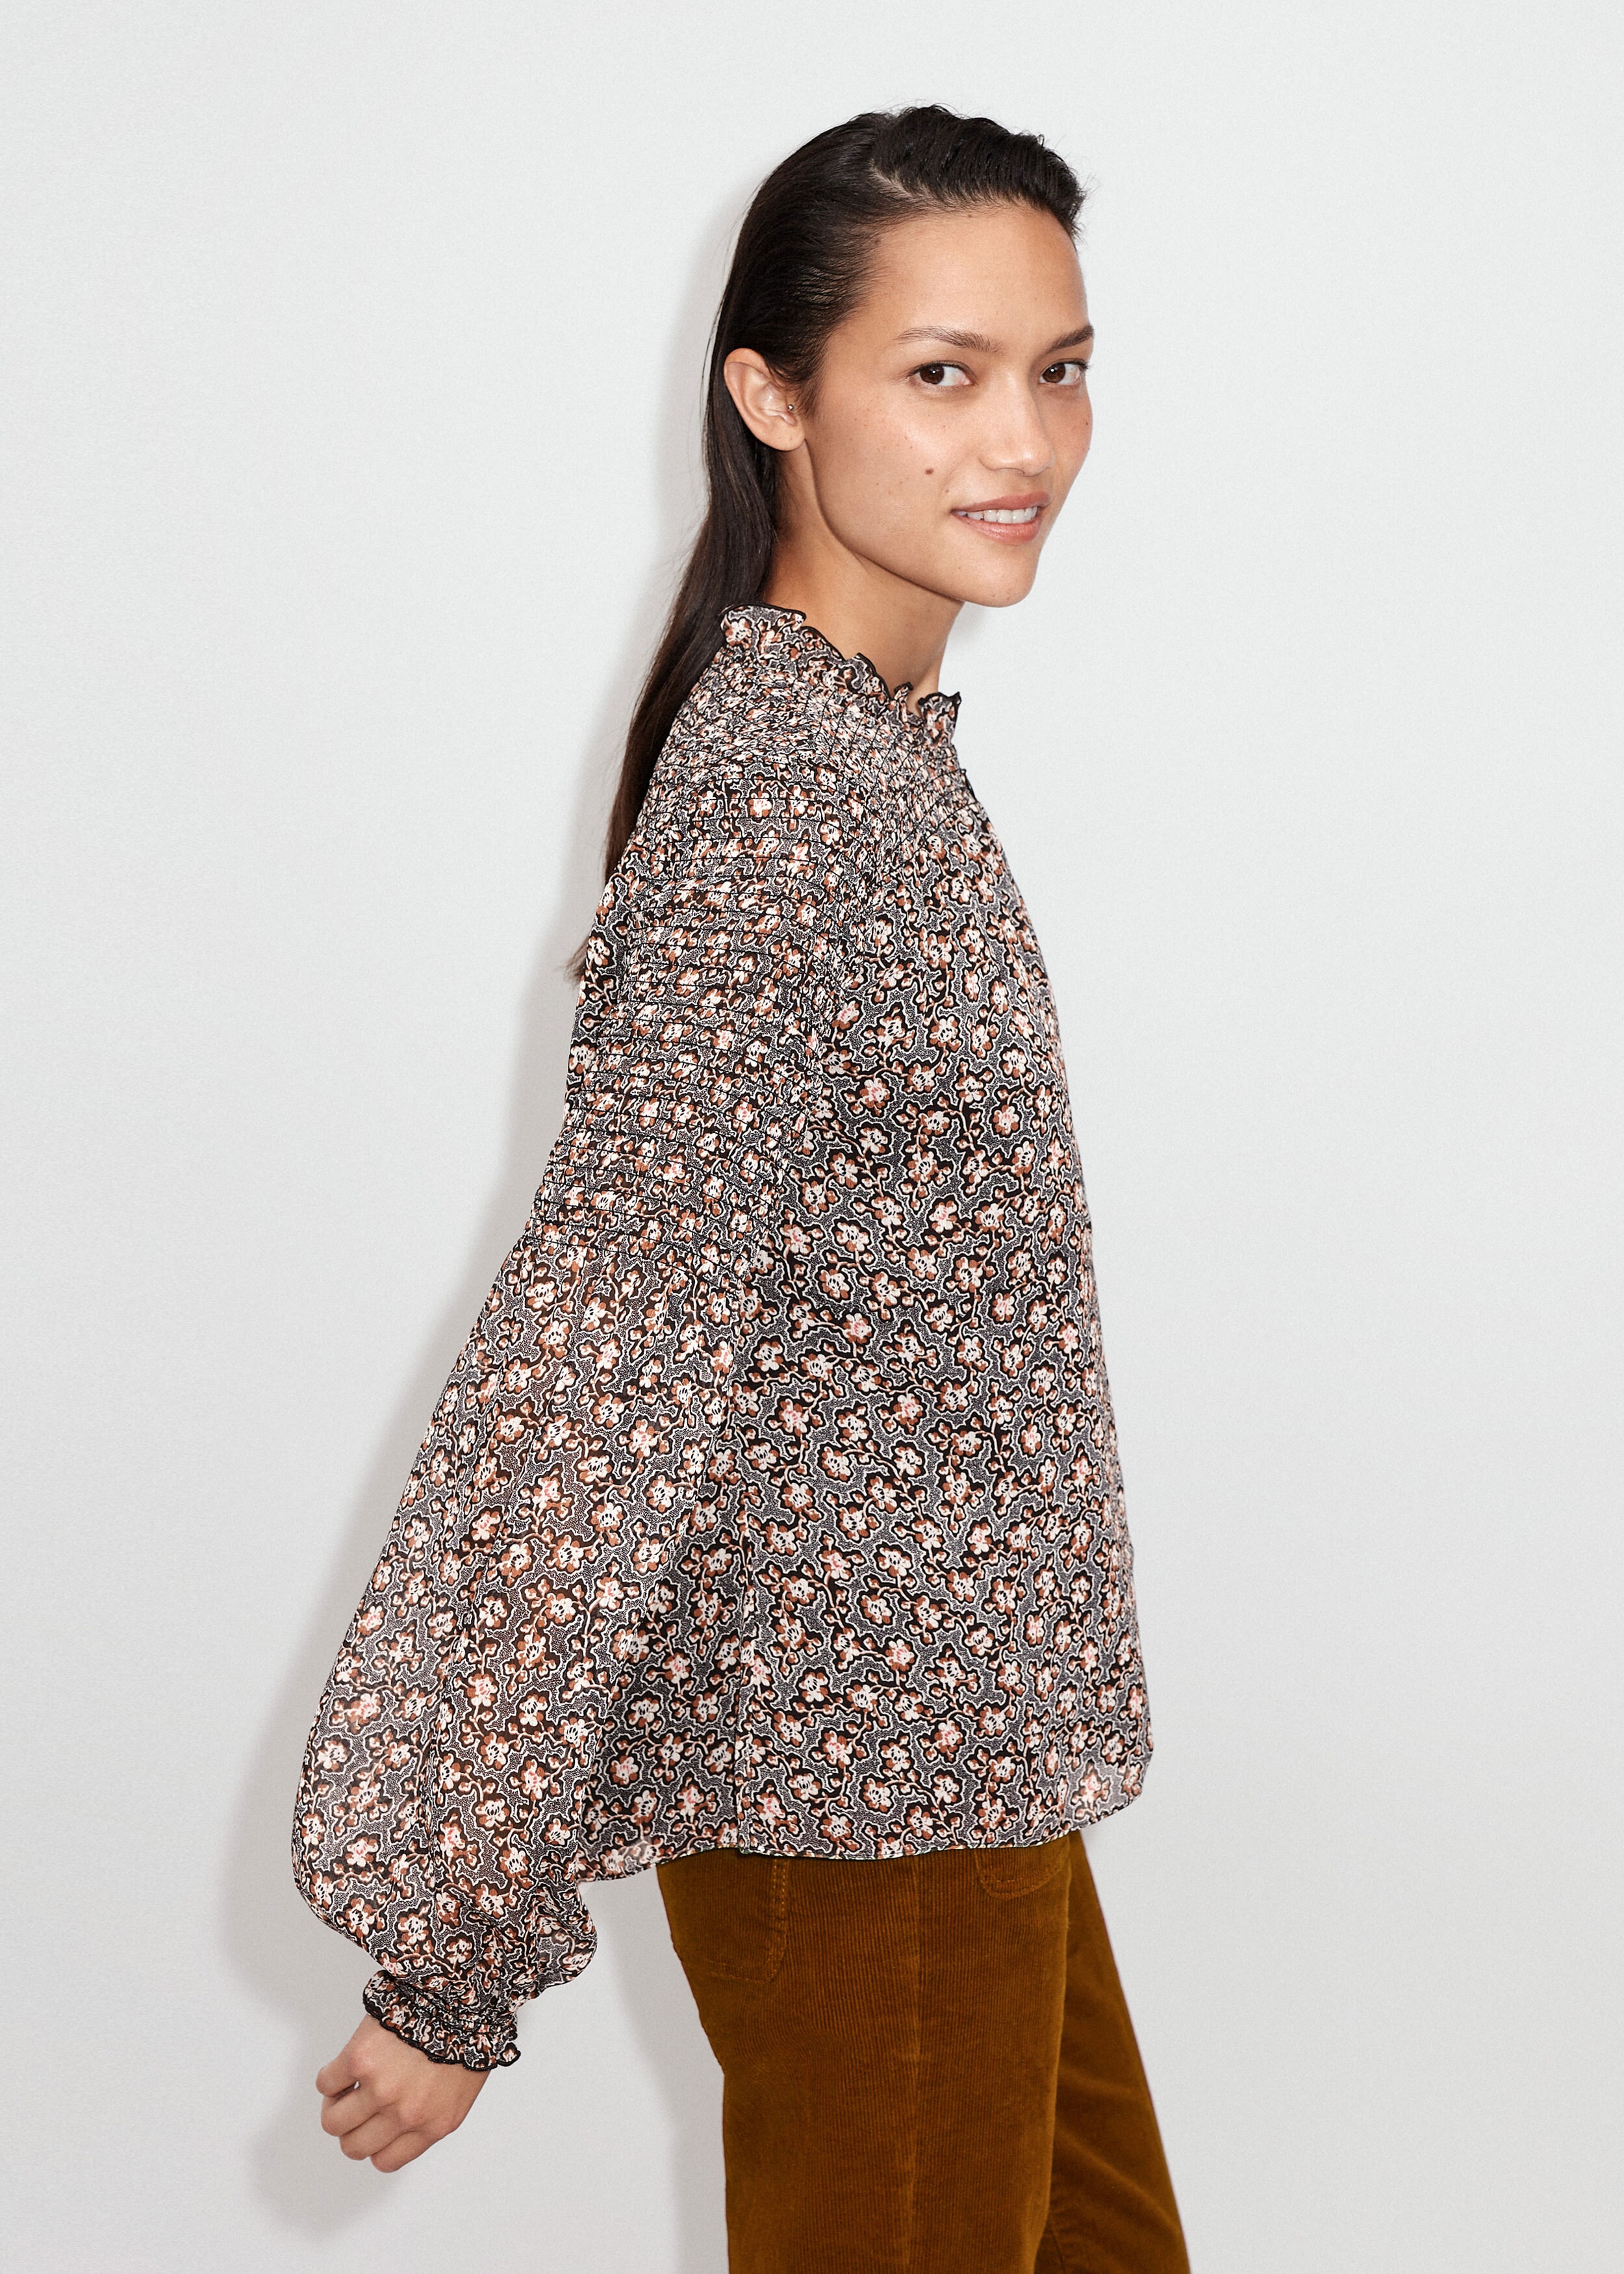 Ditsy Fall Bloom Shirred Blouse Black/Brown/Cream